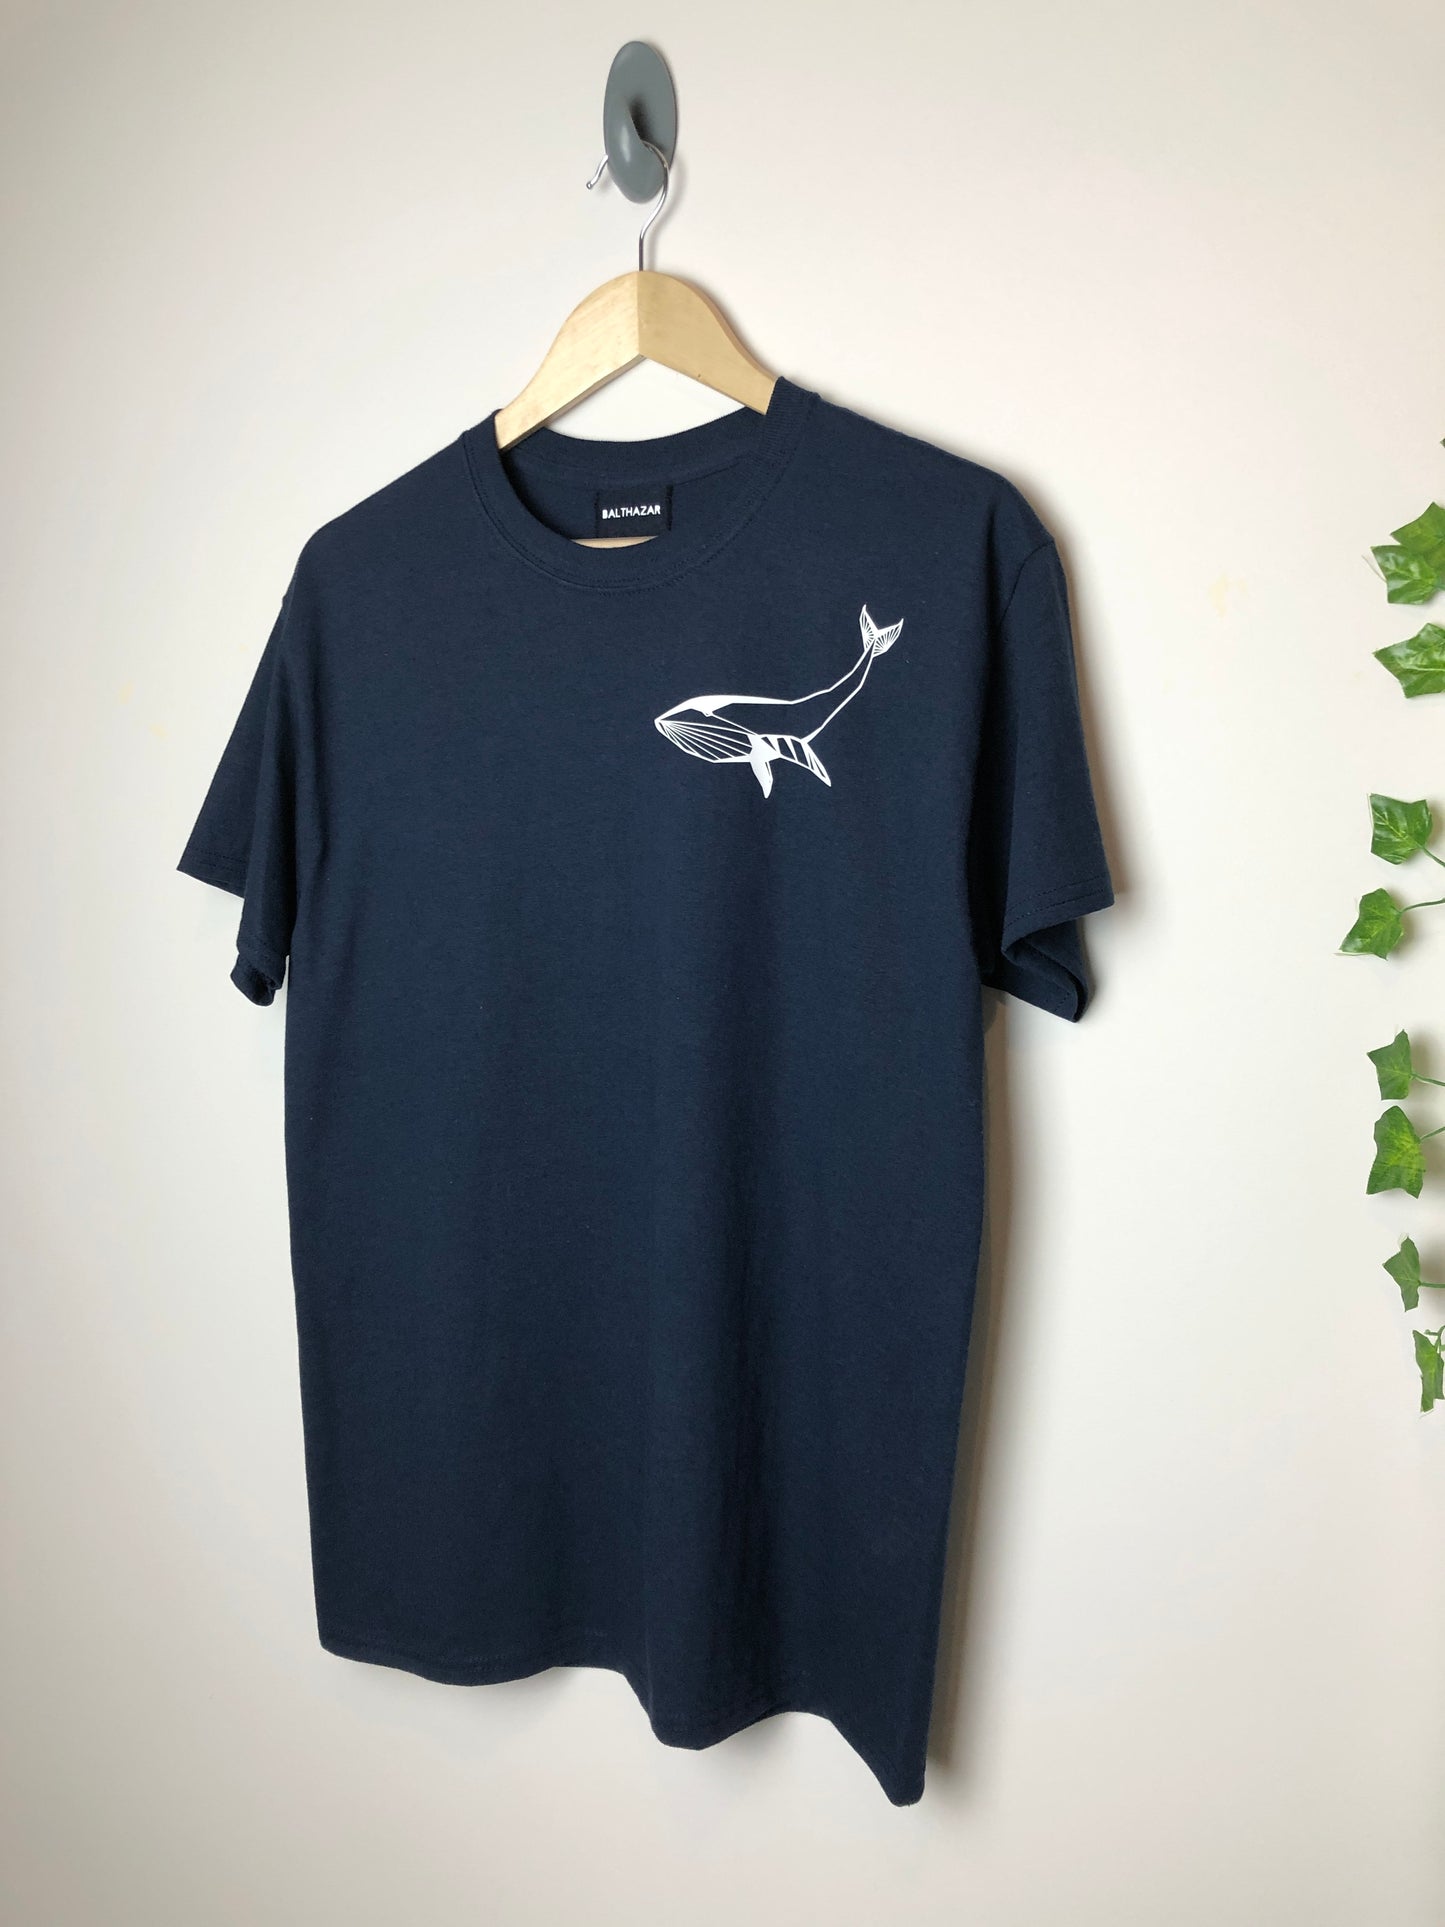 Origami Whale t-shirt